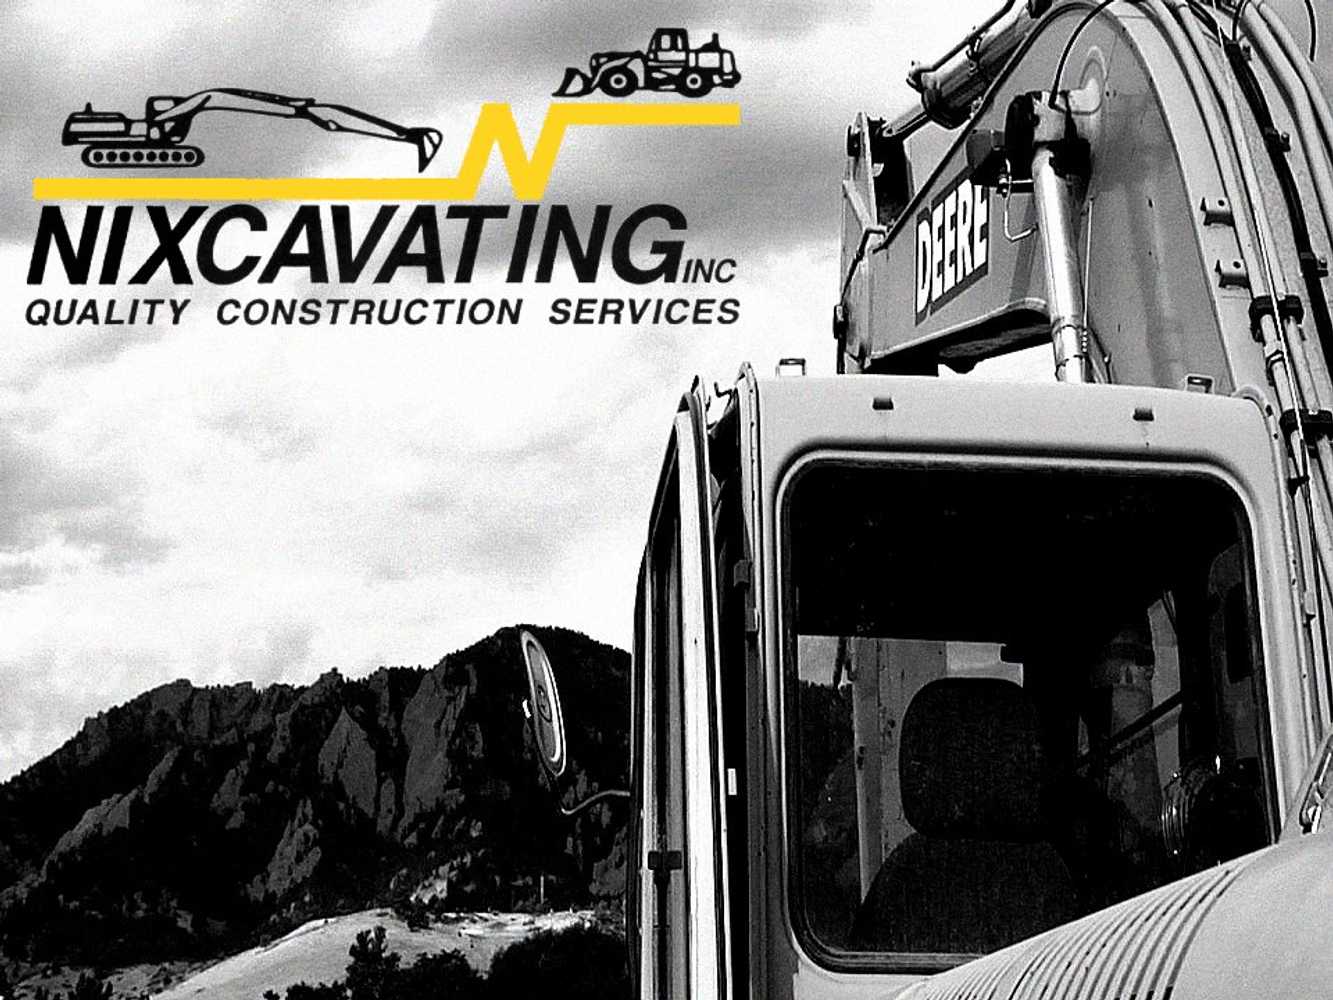 Projects by Nixcavating Inc